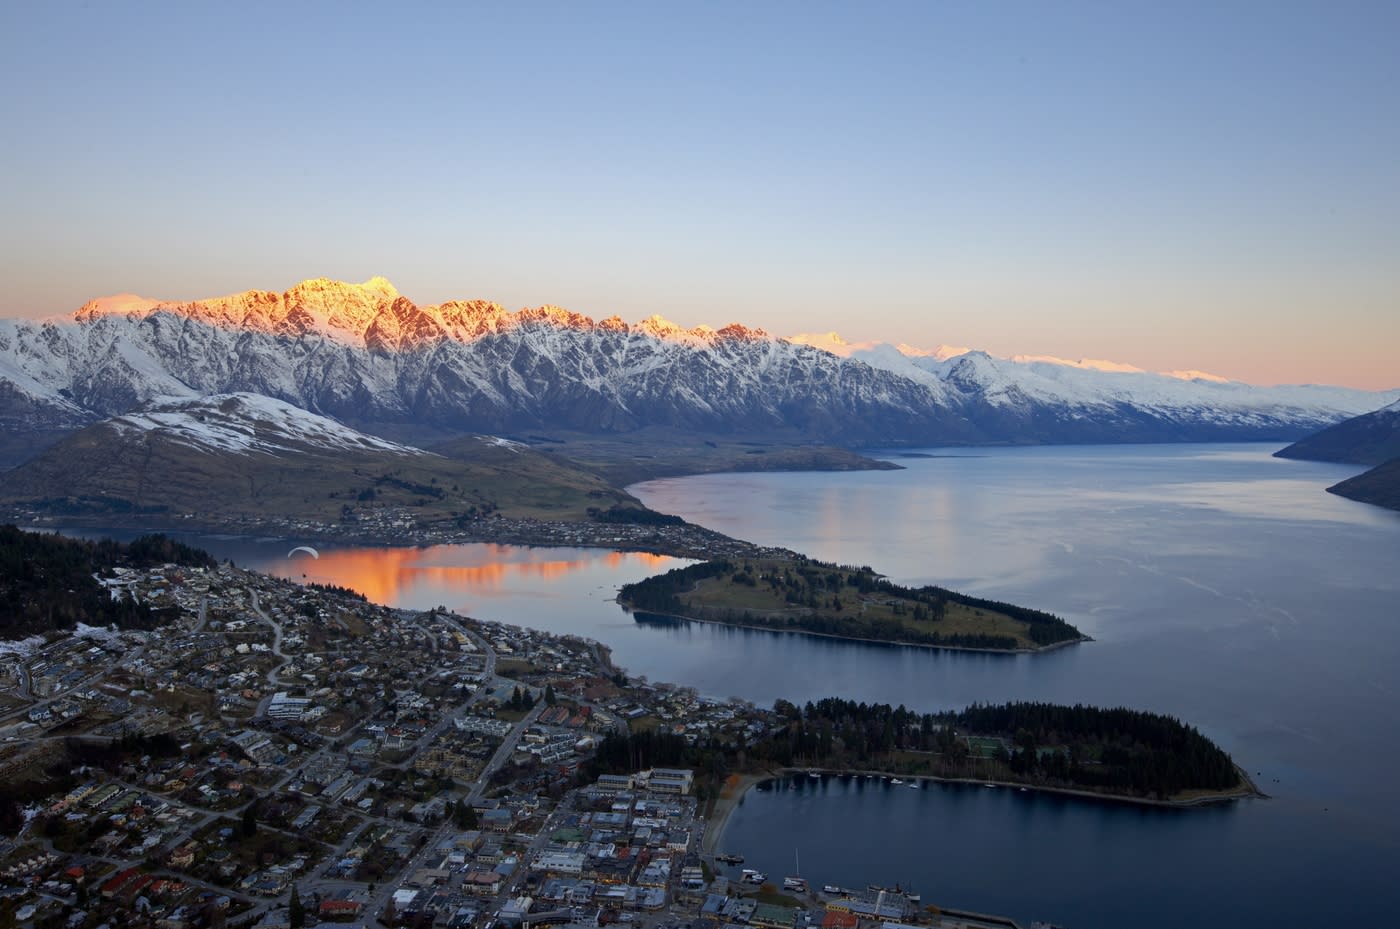 Queenstown From Above, with snow-capped mountains and lake views